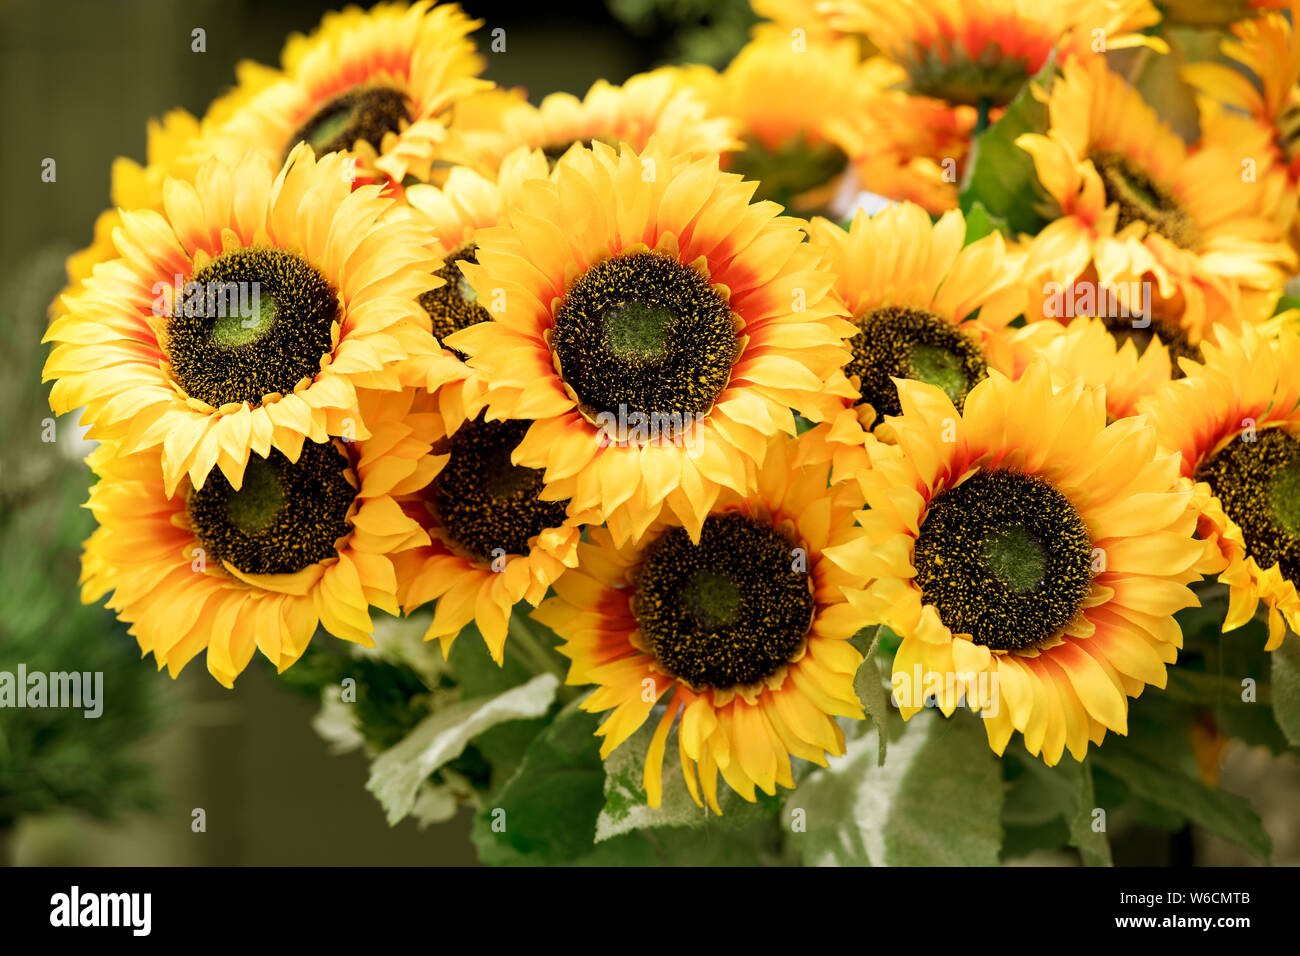 Colorful bunch of yellow sunflowers or Helianthus in a summer nursery in a close up view for flower arranging and interior decor Stock Photo